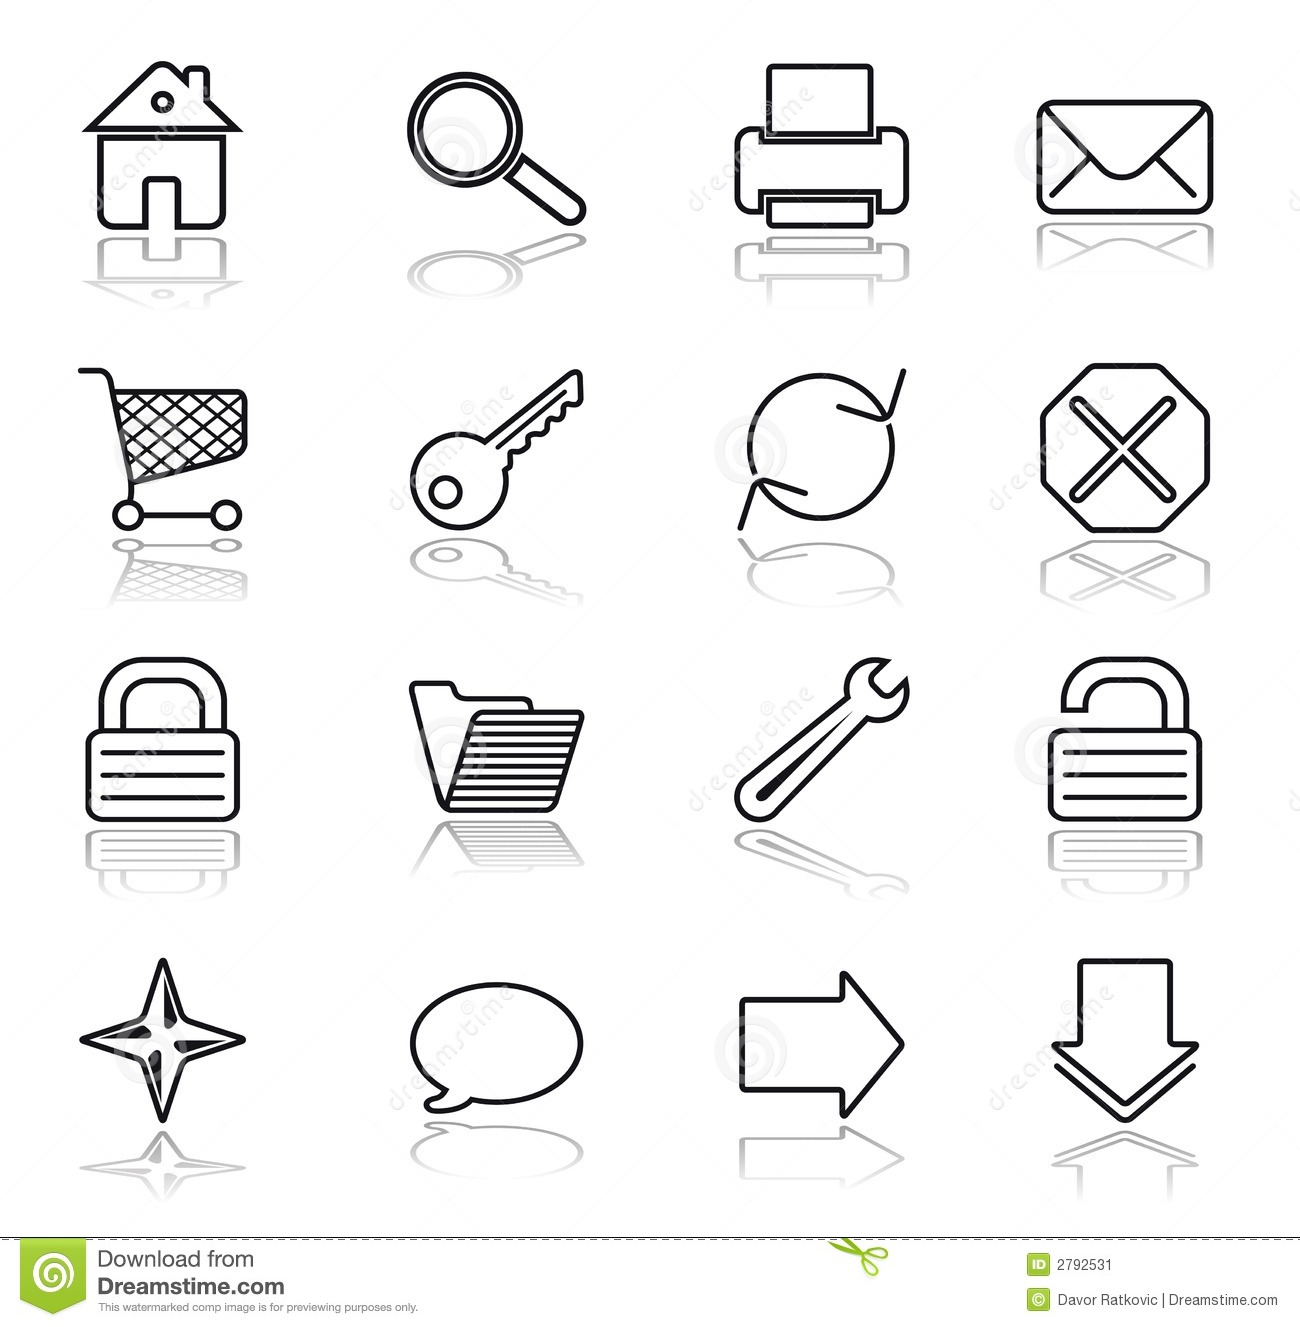 Black and White Web Icons